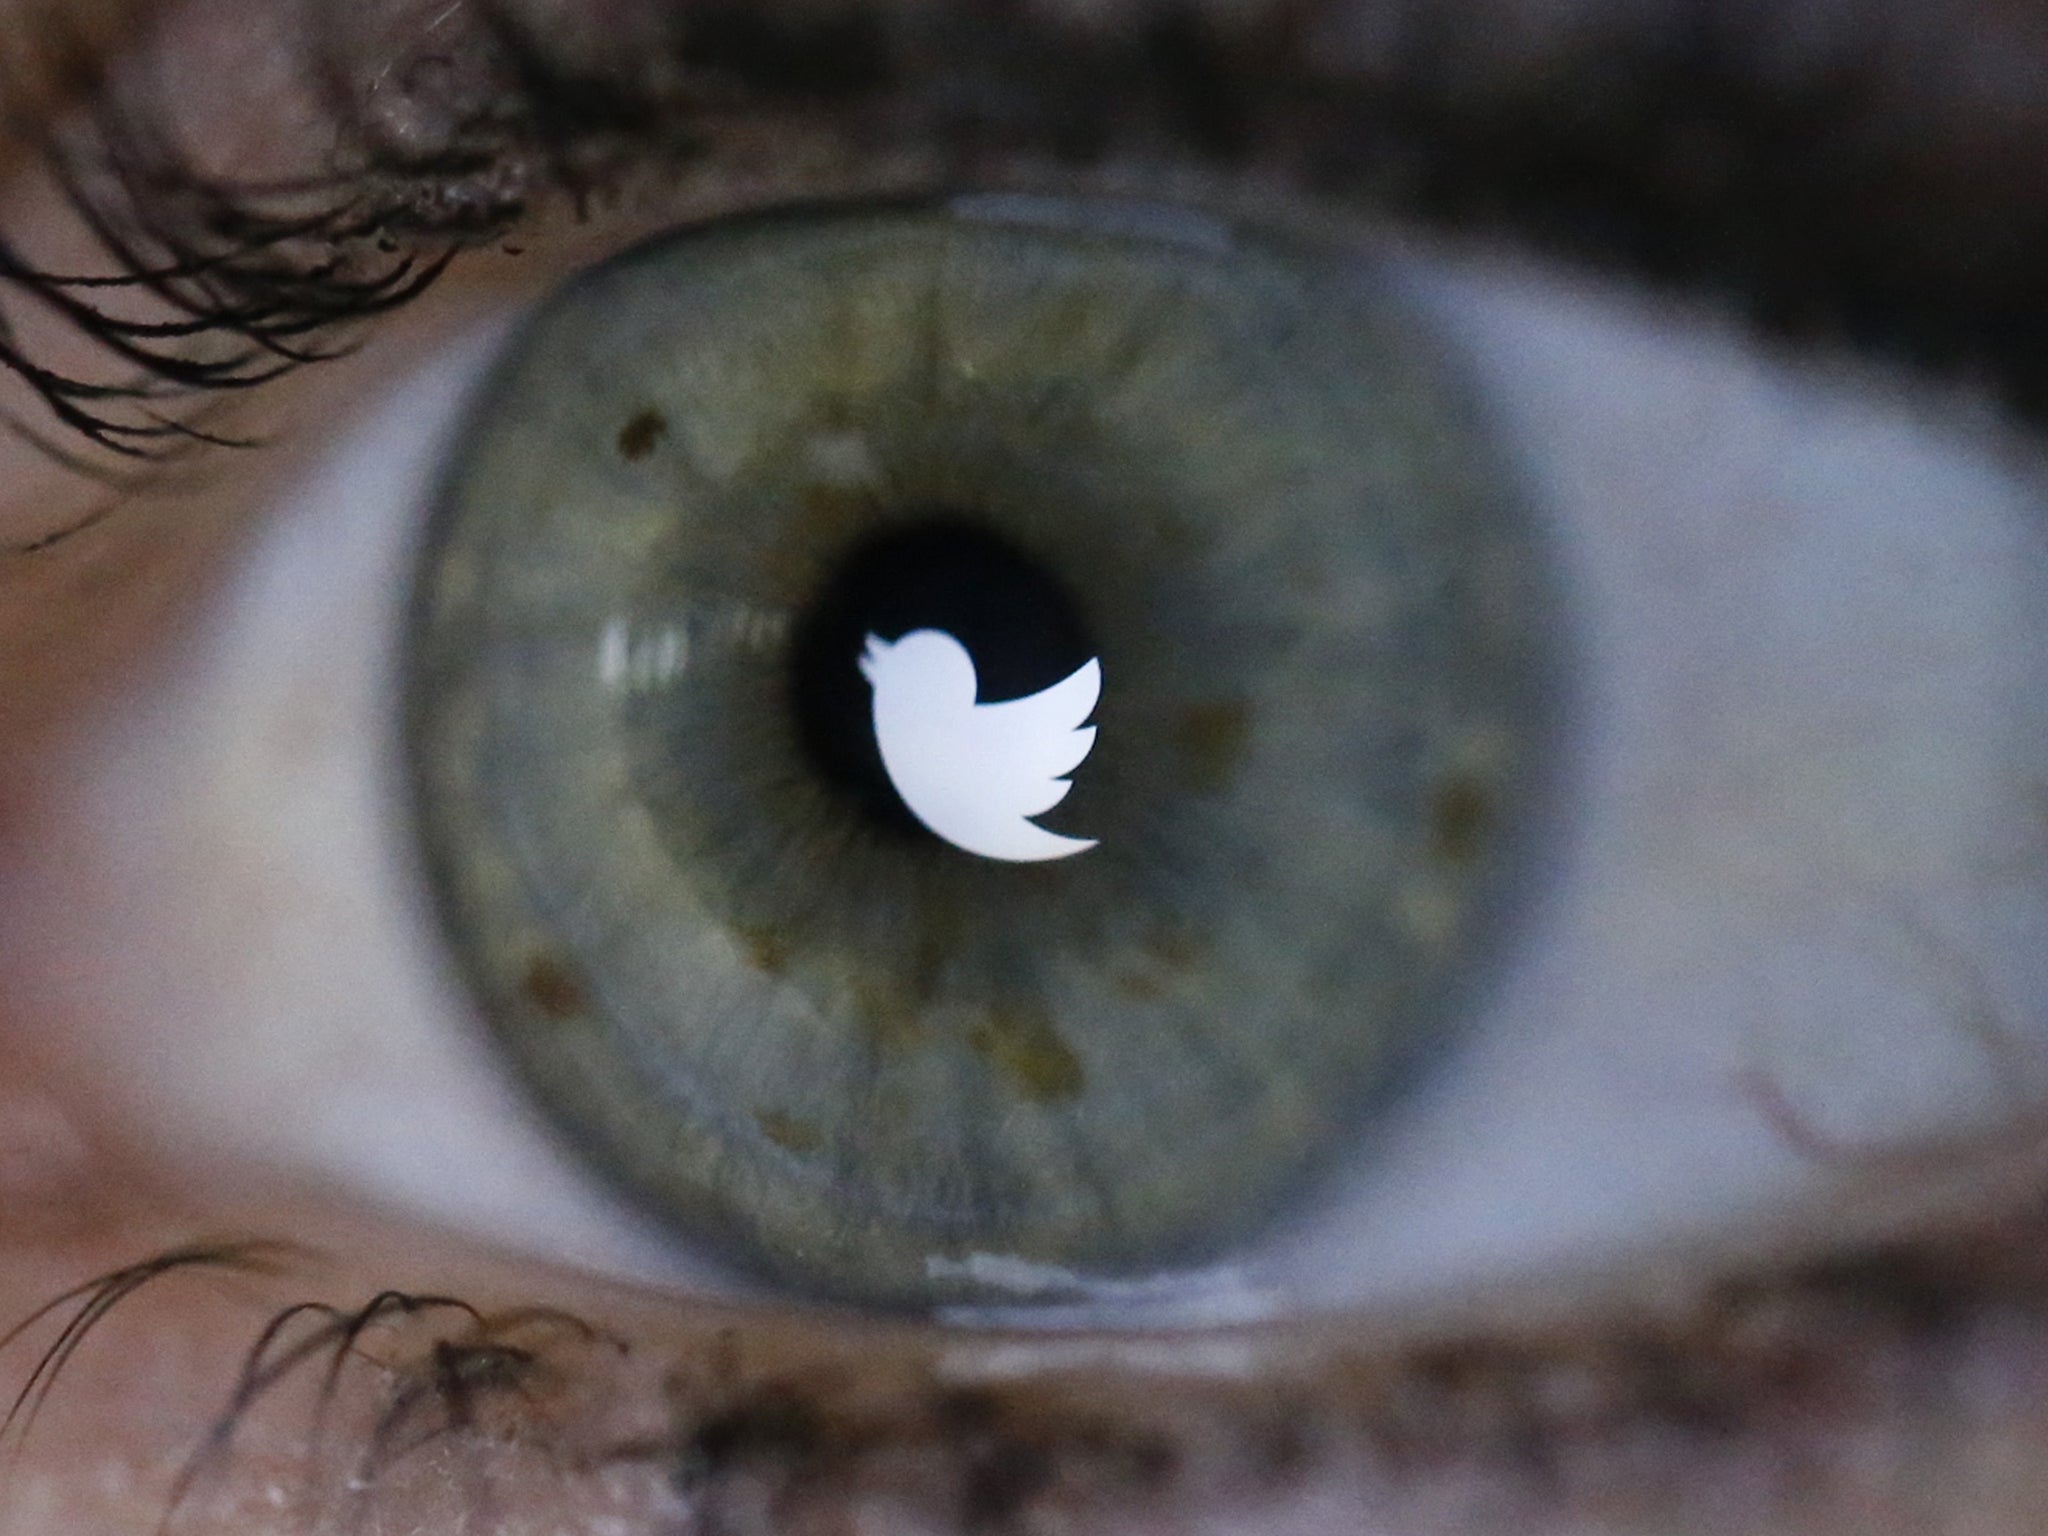 An illustration picture shows the Twitter logo reflected in the eye of a woman in Berlin, November 7, 2013